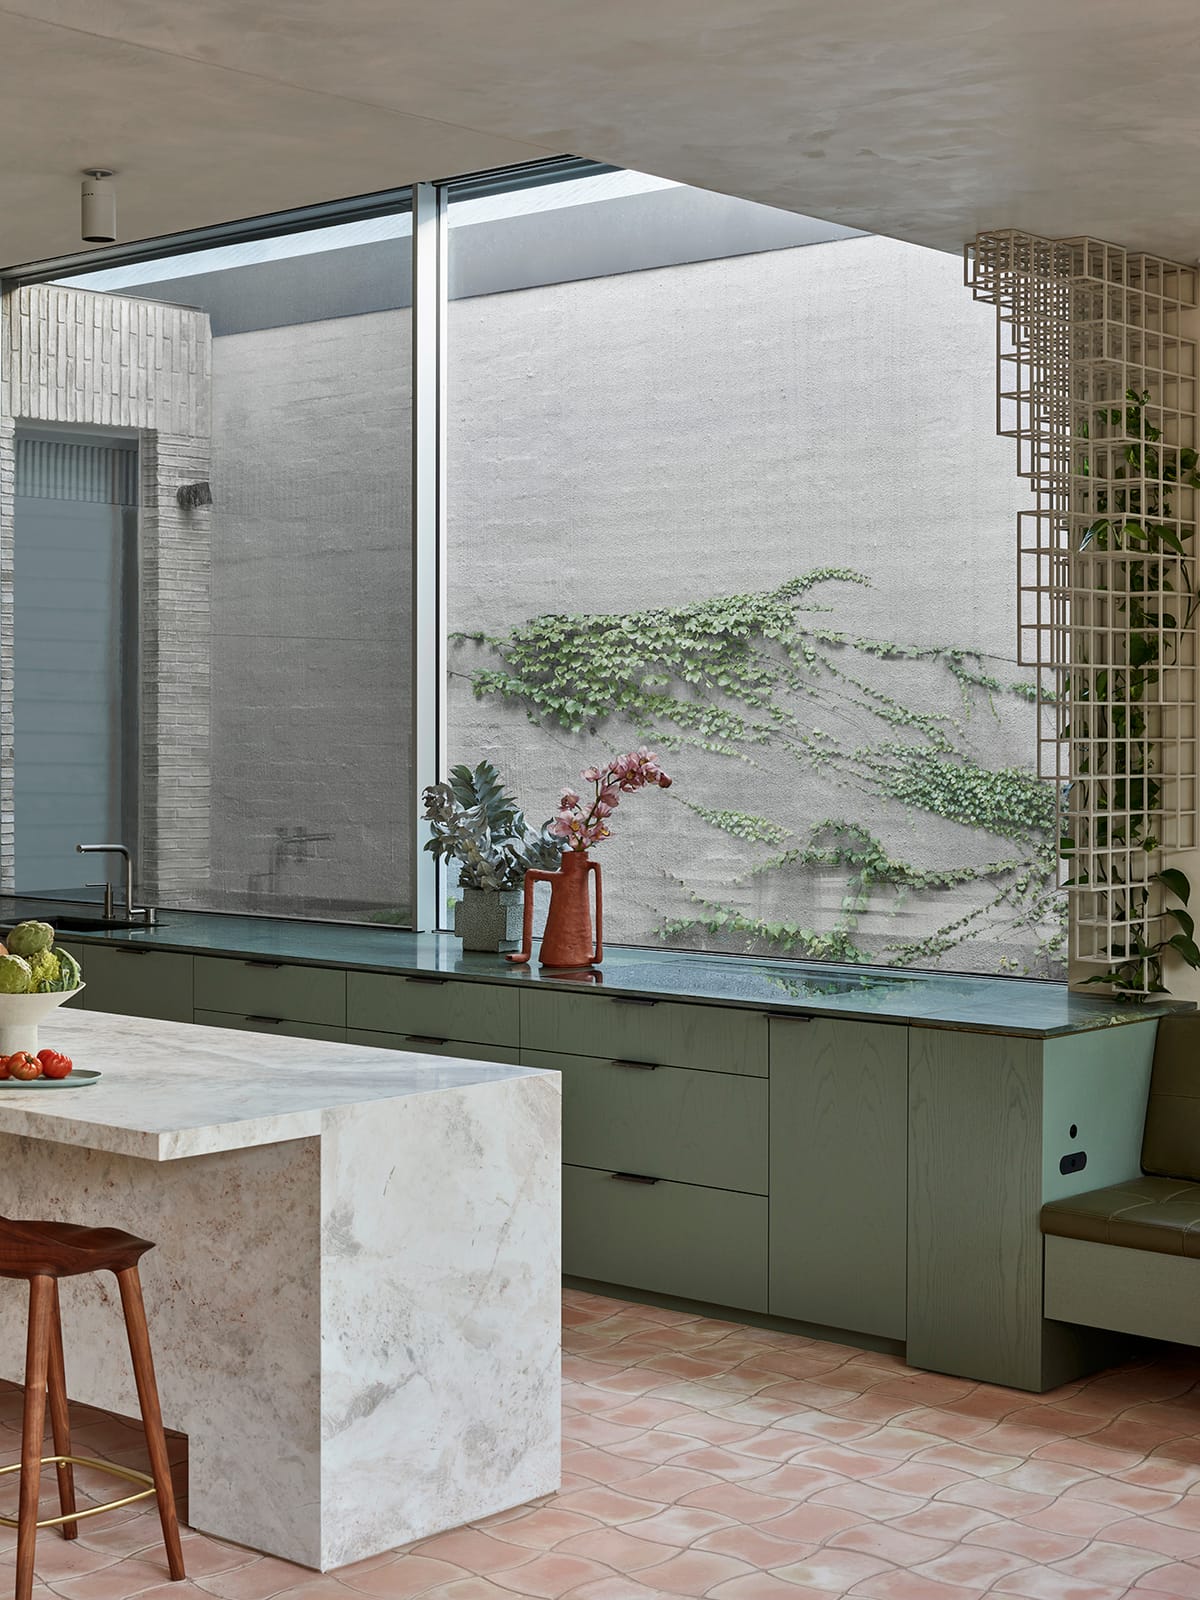 Terra Firma by RobsonRak. Photography by Mark Roper. Residential kitchen with terracotta floortiles, green counters and m